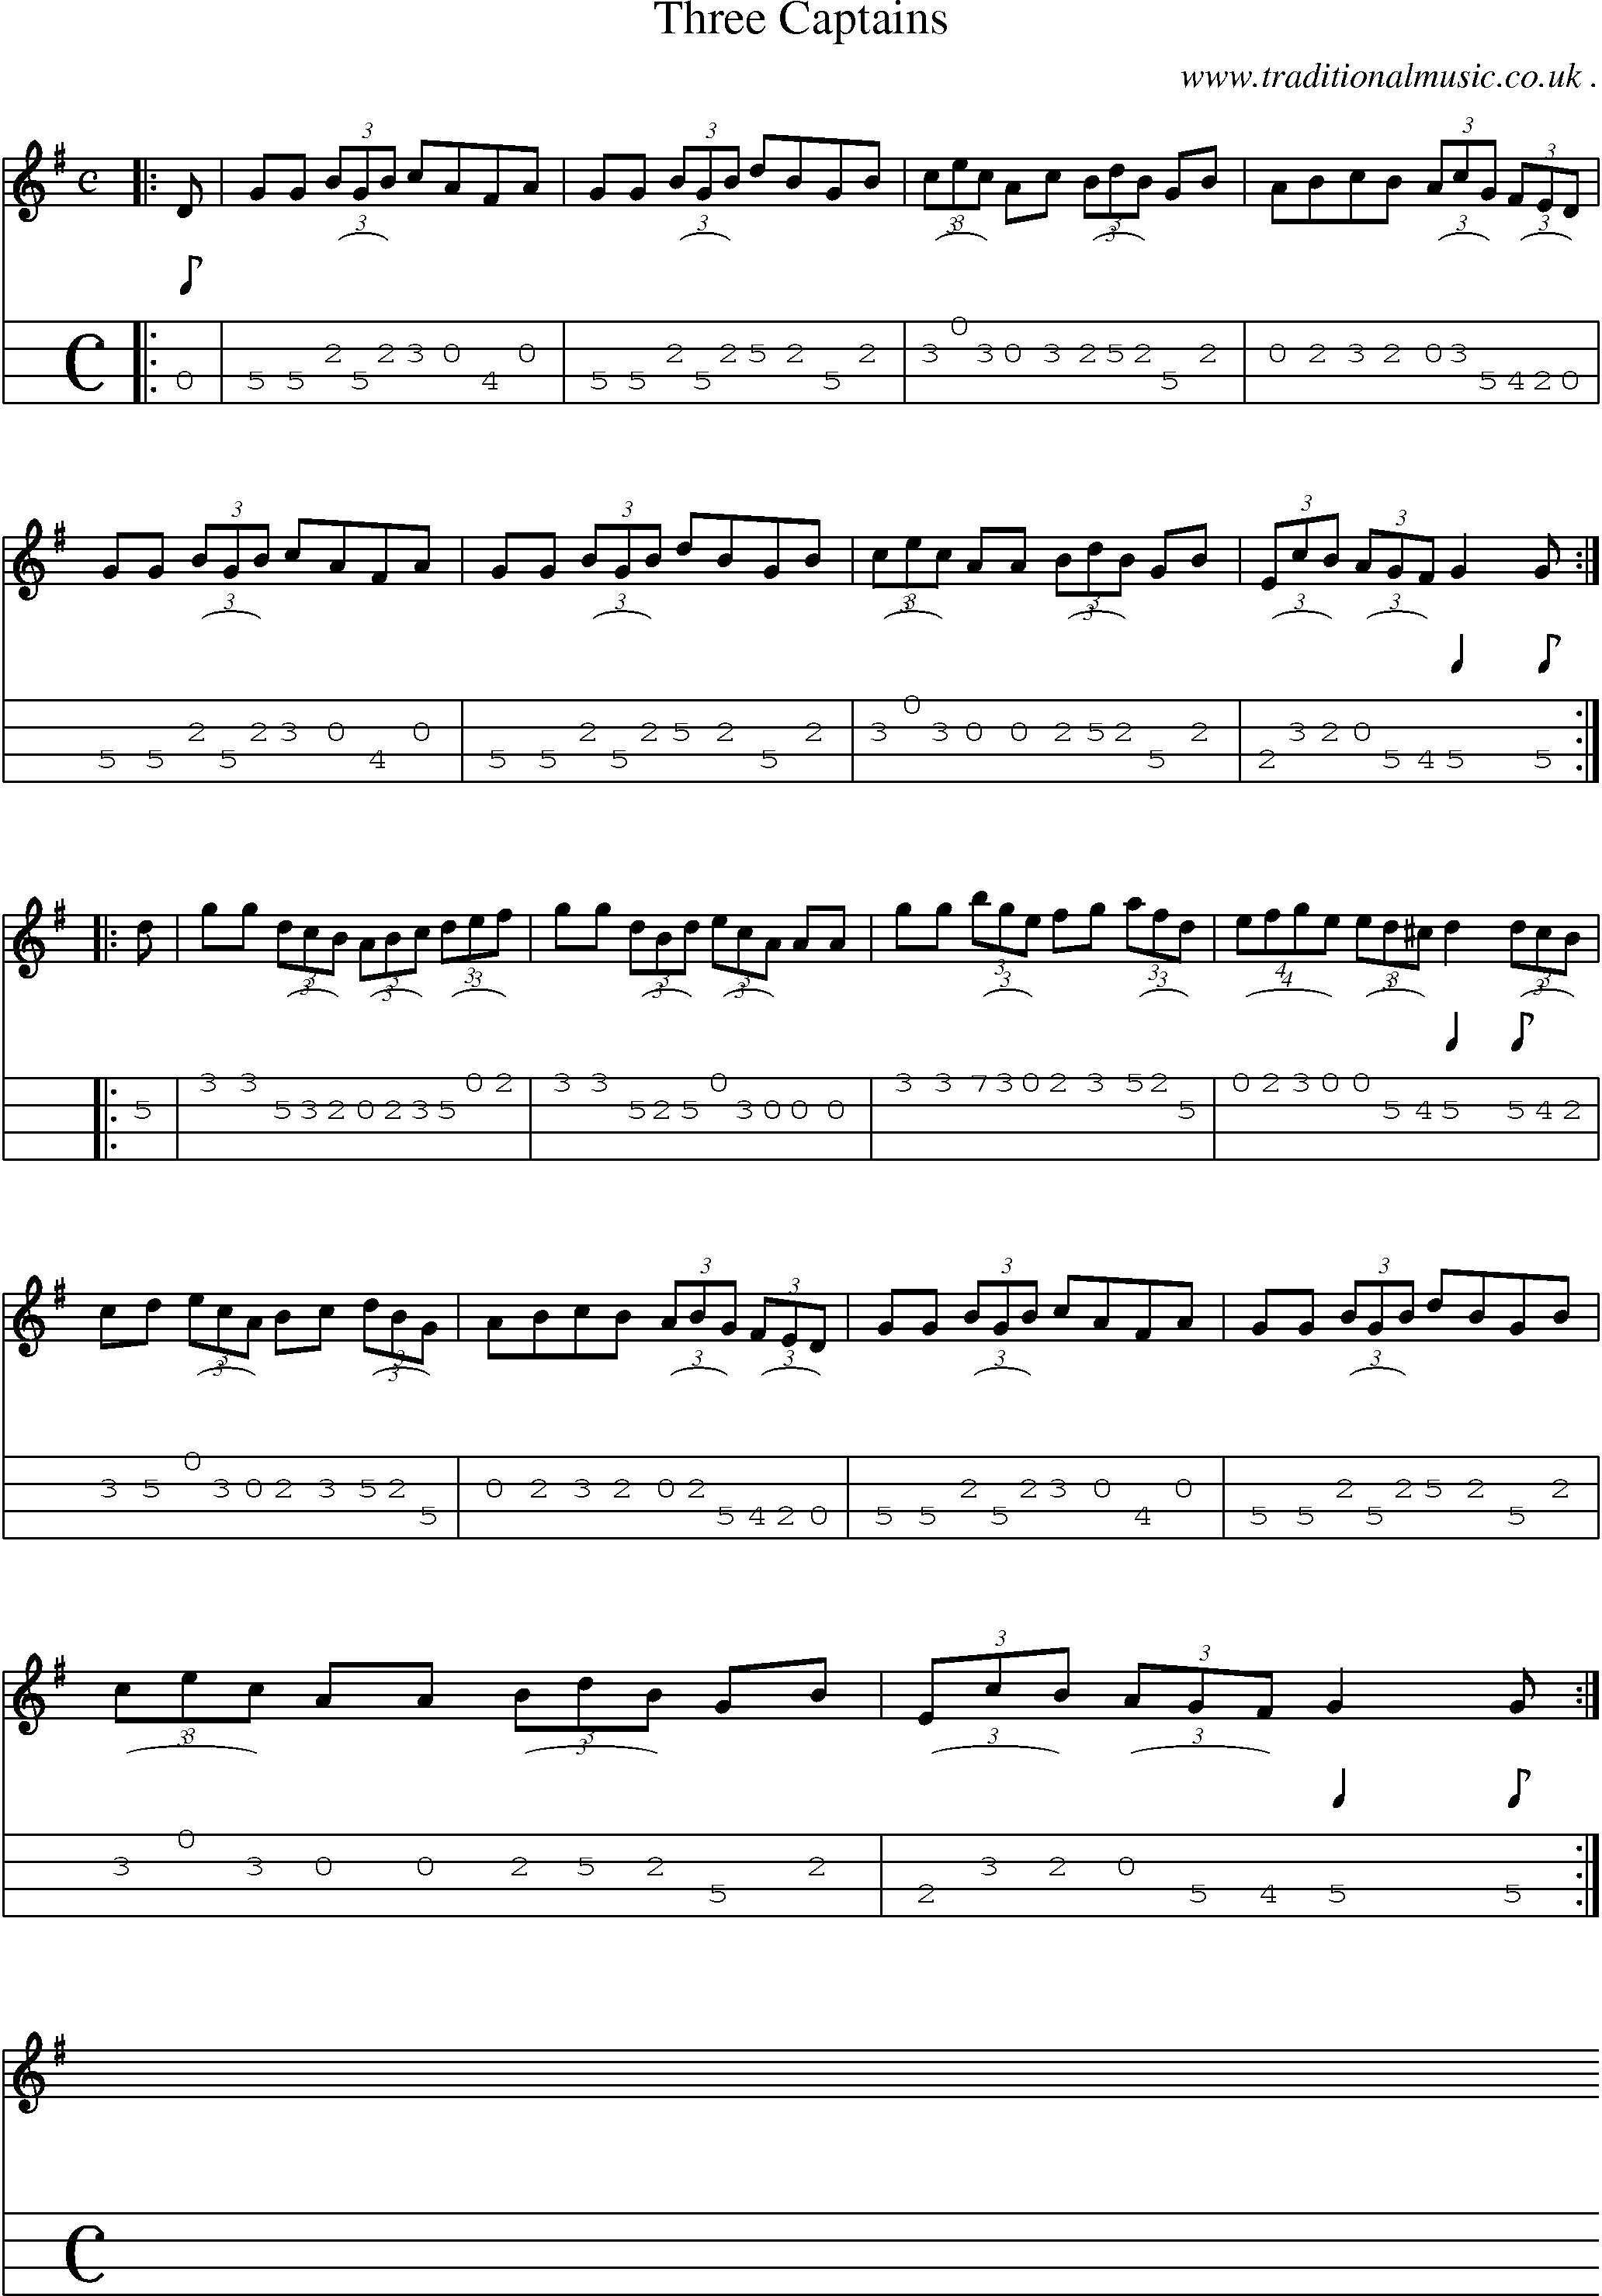 Sheet-Music and Mandolin Tabs for Three Captains